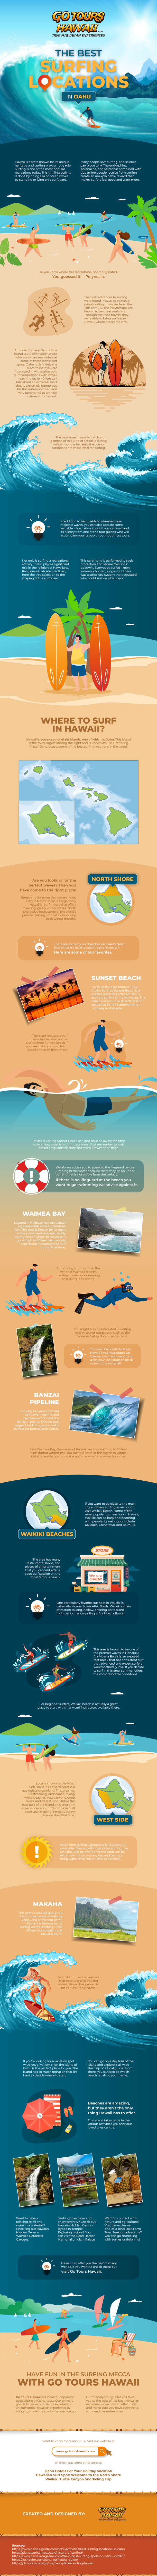 The-Best-Surfing-Locations-in-Oahu-01-GTH-Infographic-Image